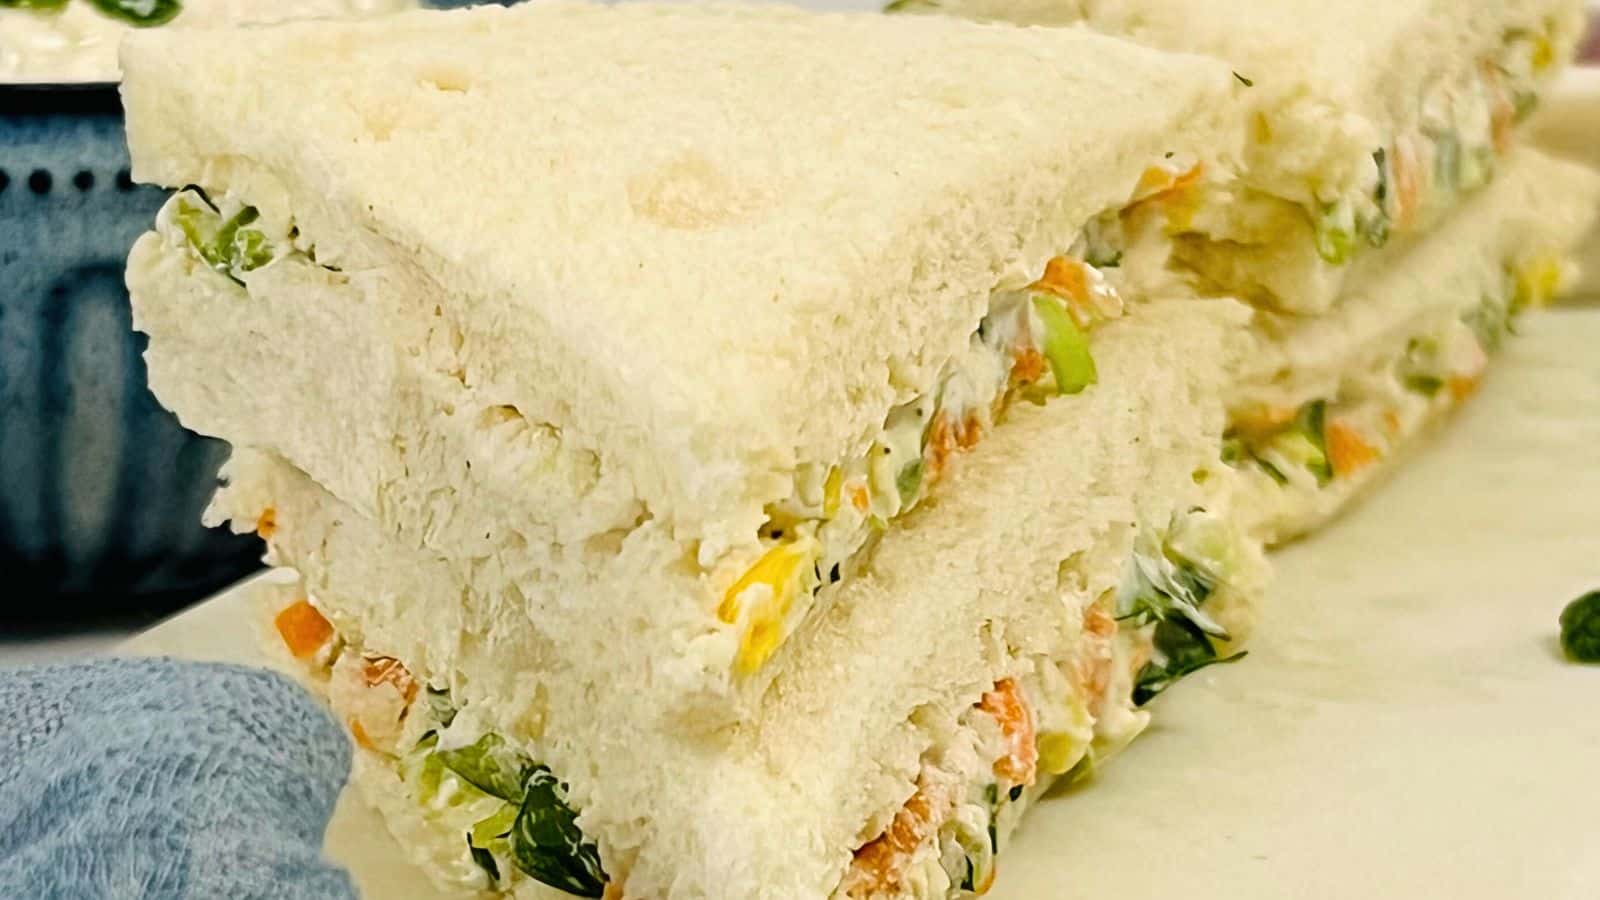 Close-up view of a stack of Yogurt Sandwich with white bread, filled with tuna salad and crisp vegetables.